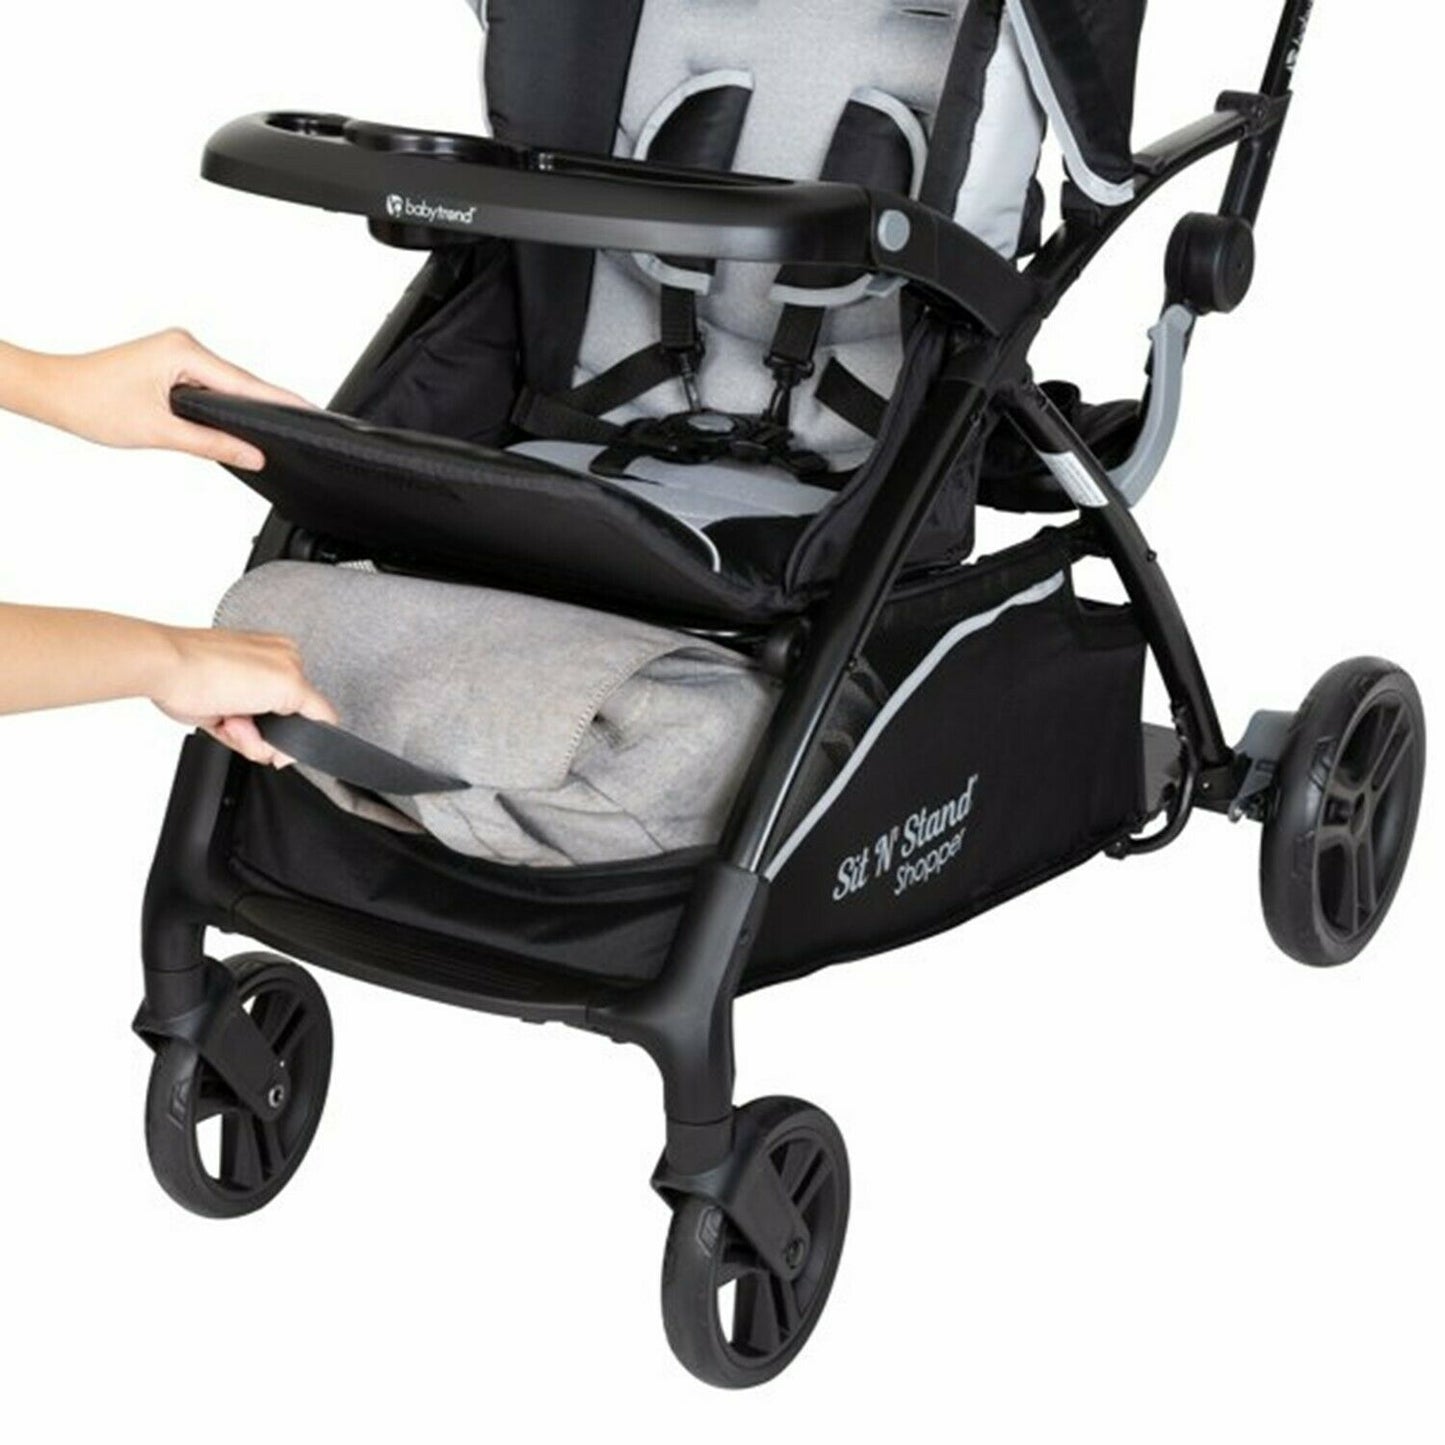 Baby Trend Sit N Stand 5-in-1 Stroller with Car Seat Shopper Playard Travel Set